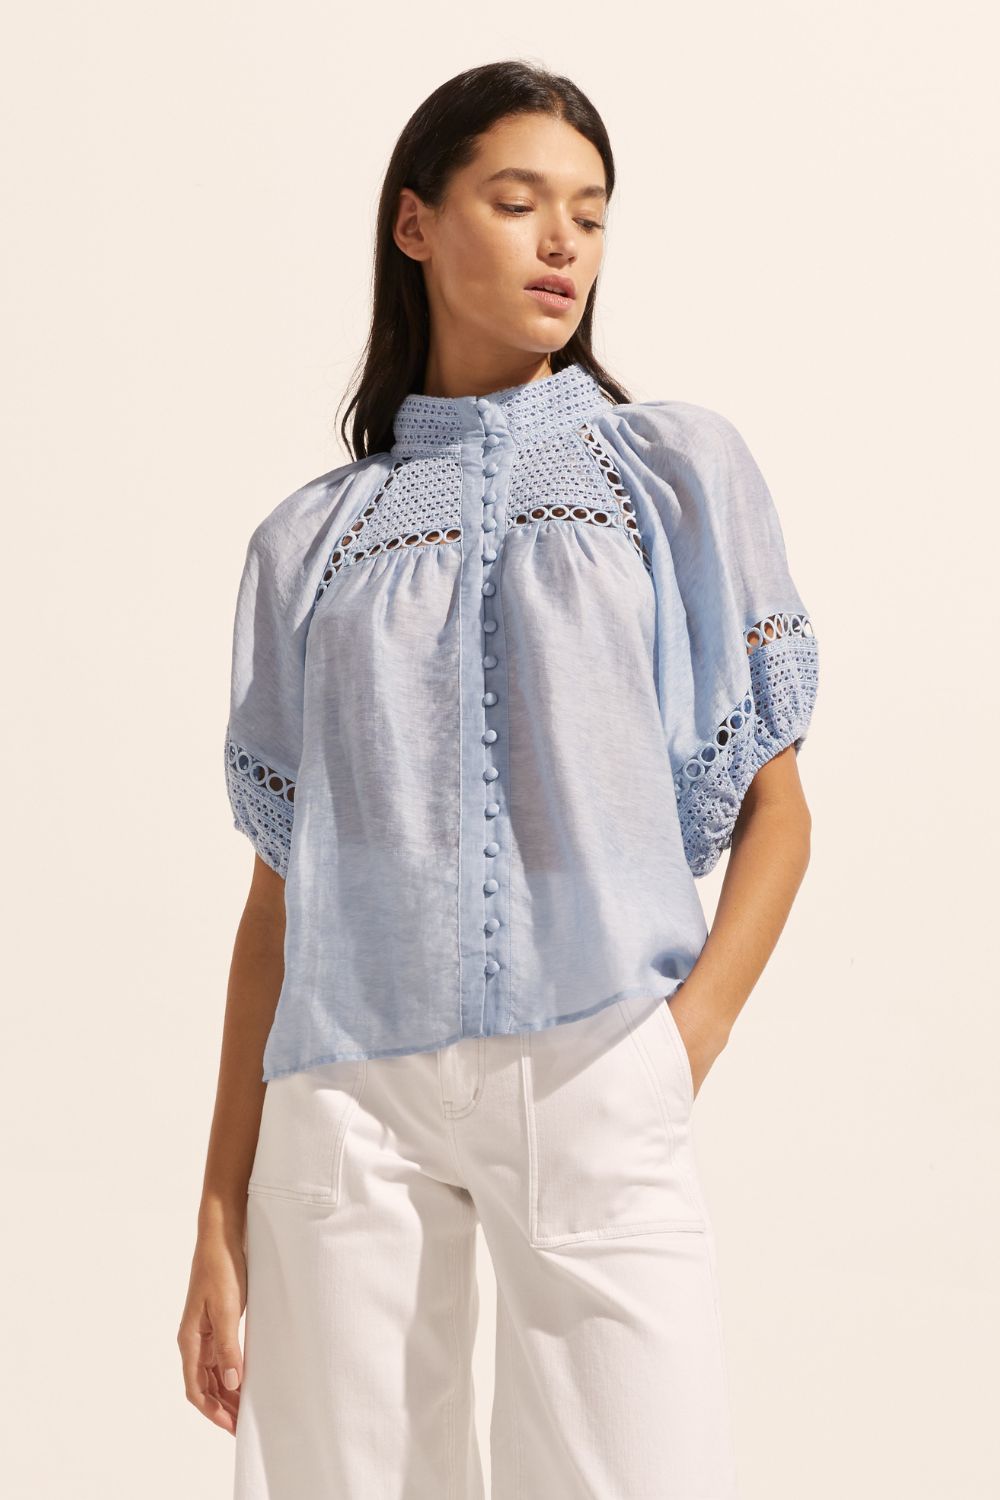 blue, top, high neck, mid-length sleeve, covered buttons, circular lace detailing, front image